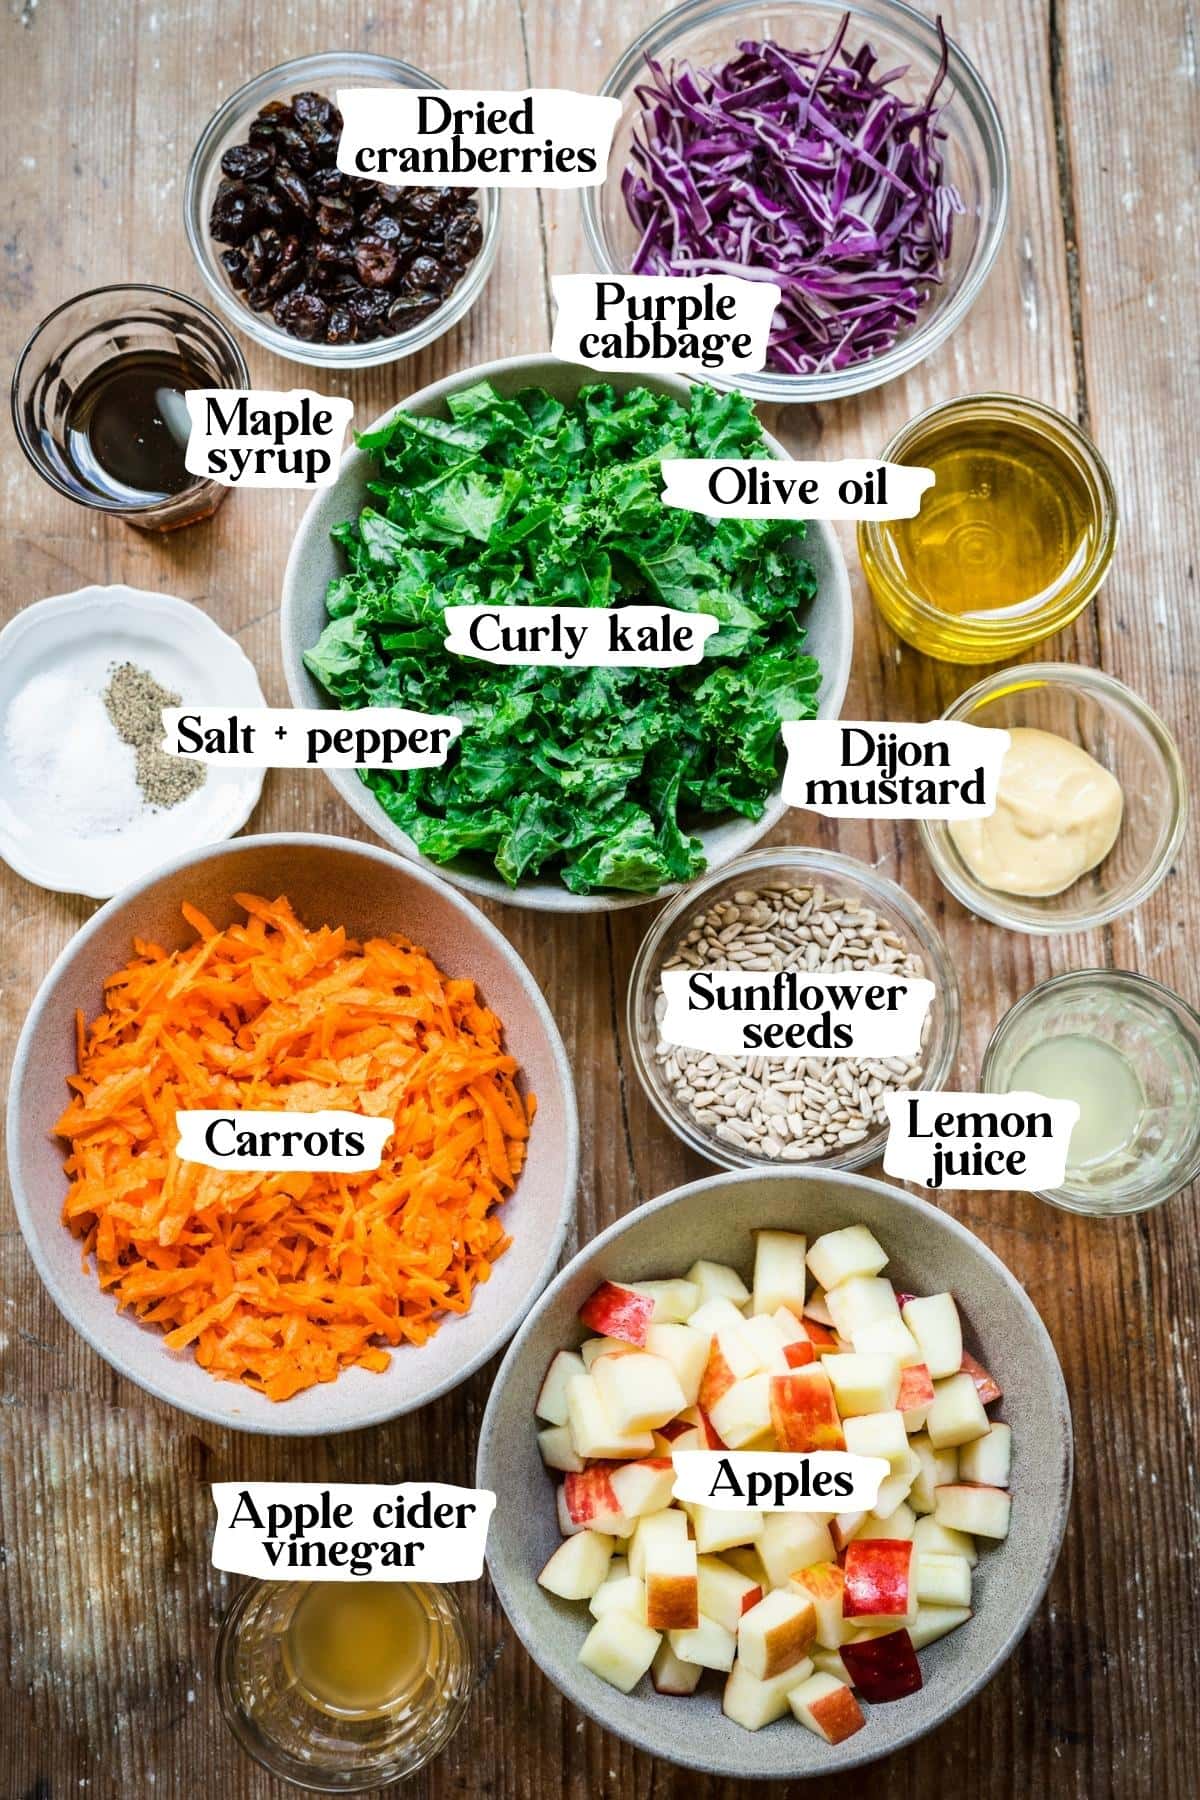 Overhead view of kale apple slaw ingredients, including kale and carrots.